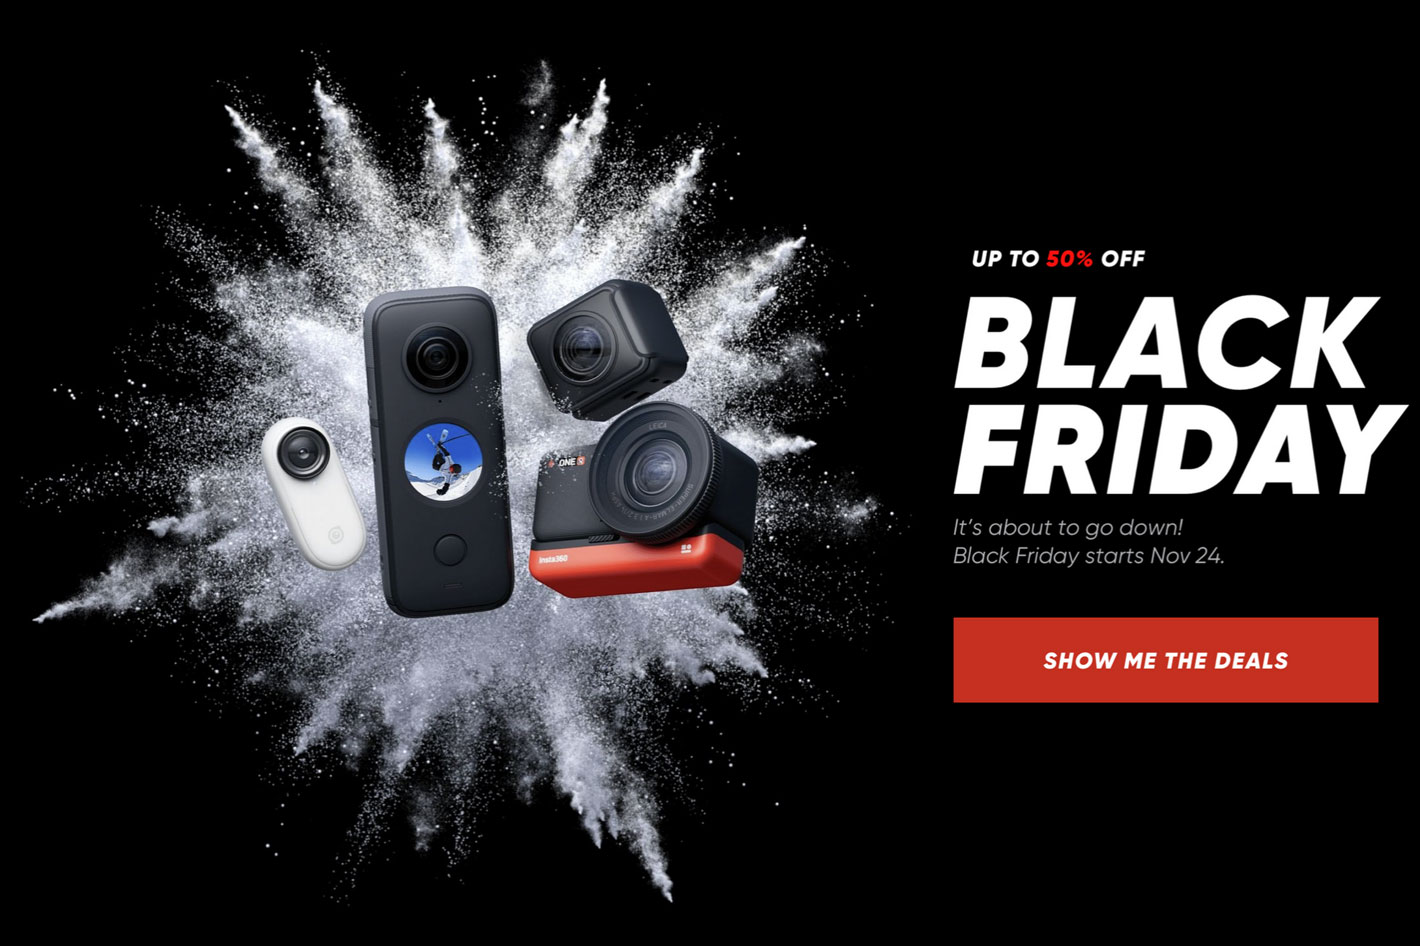 PVC’s Black Friday 2021 best deals: here are some bargains